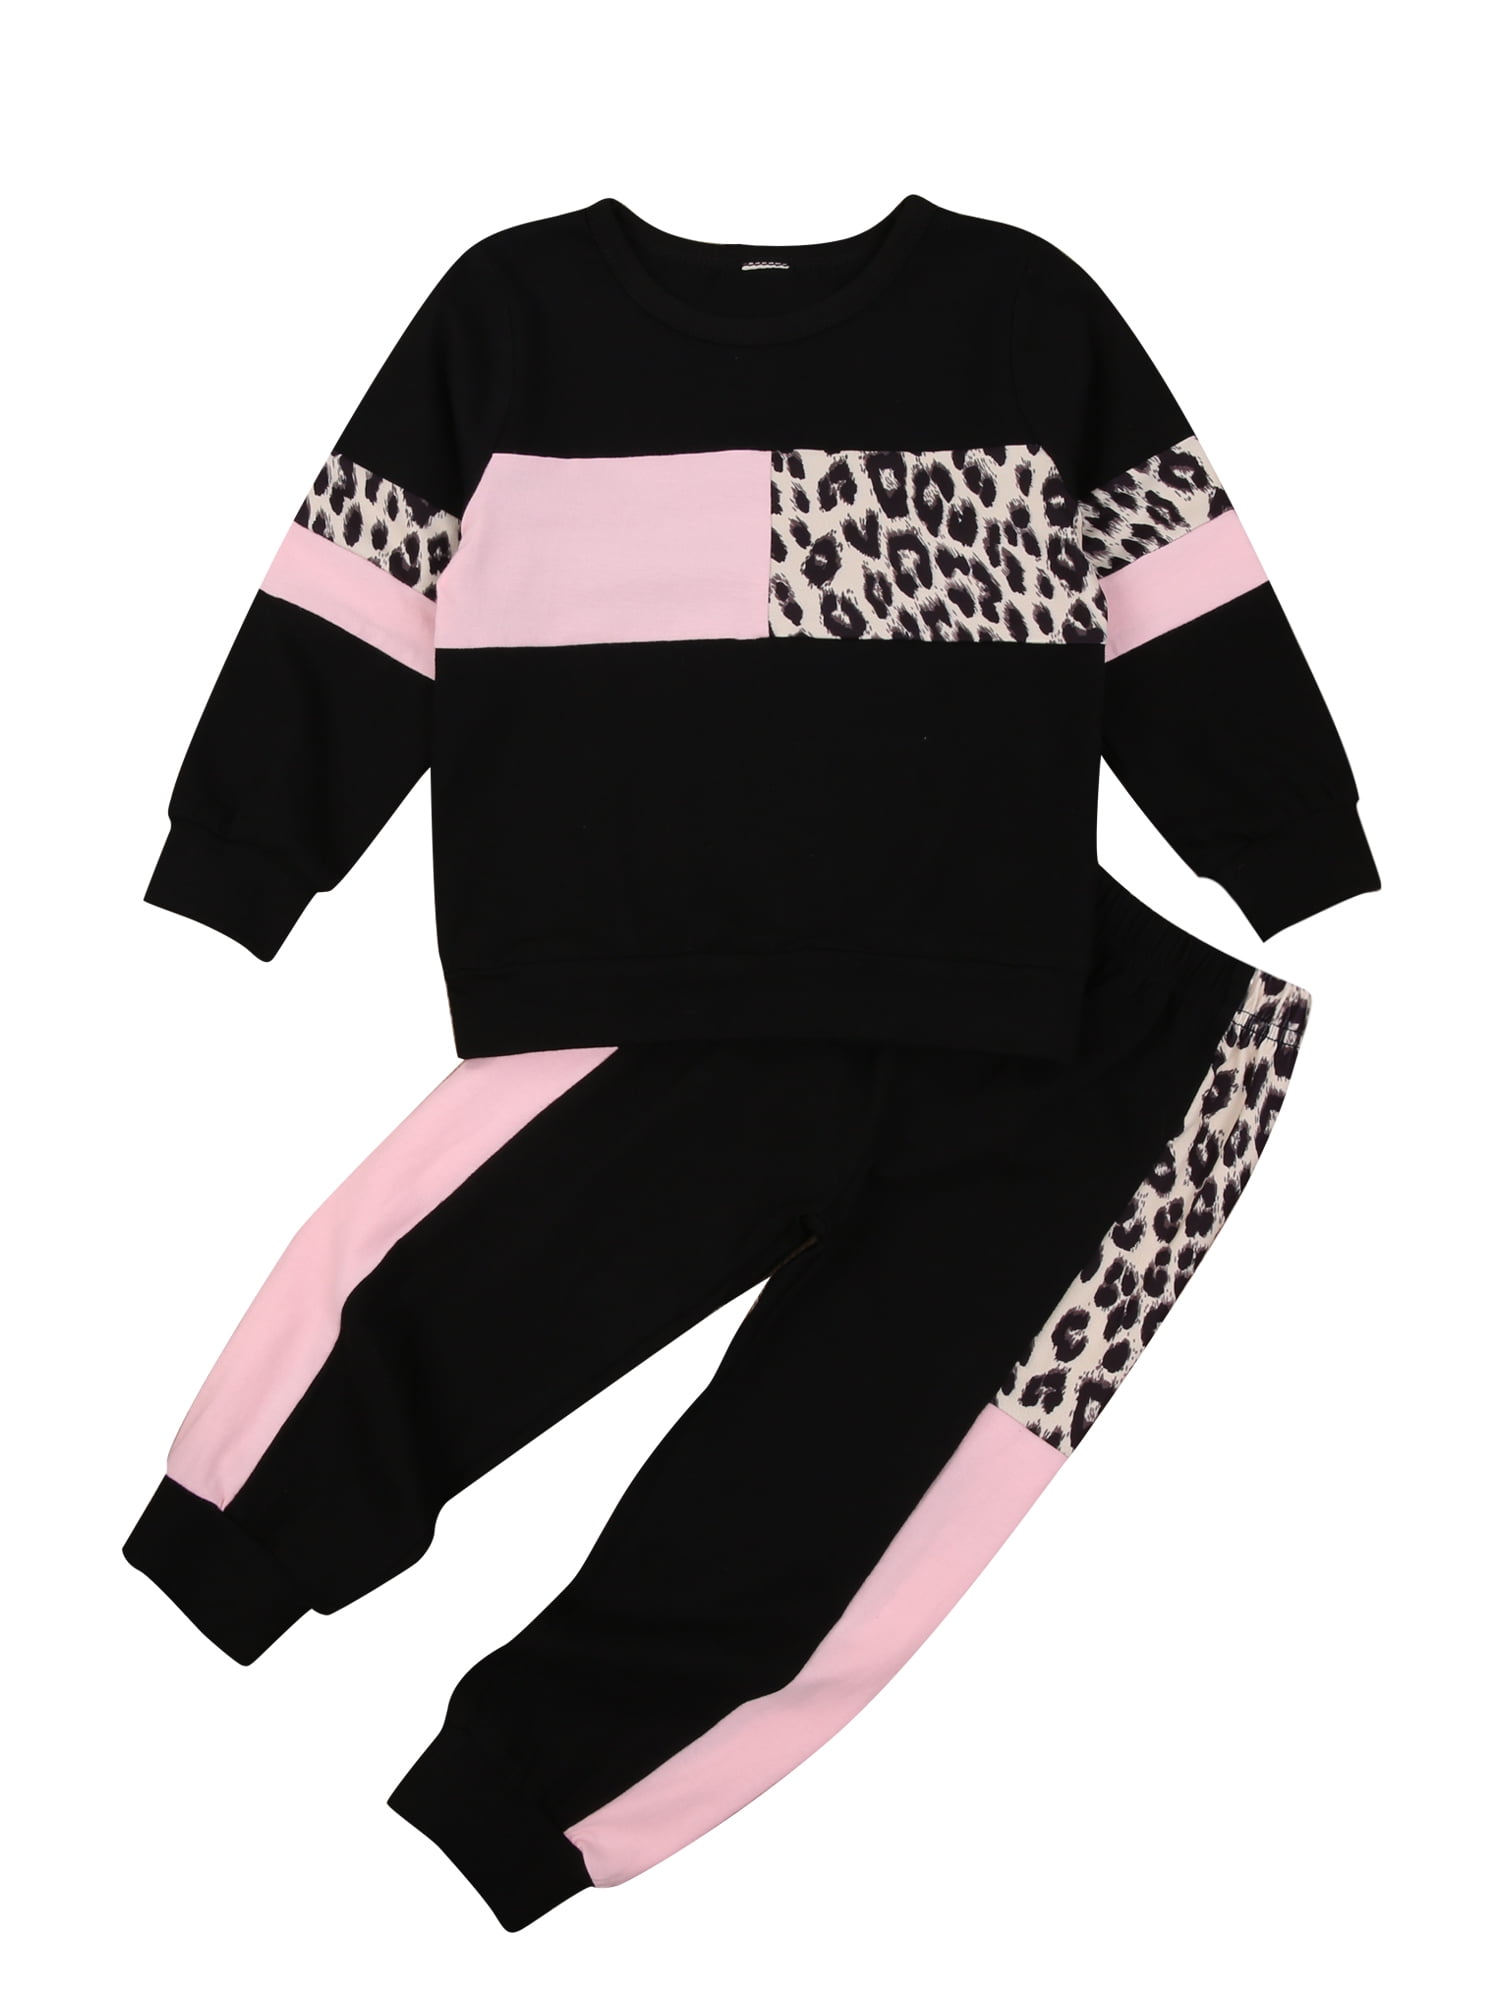 Liangchenme Kids Toddler Baby Girl Leopard Color-block Tracksuit Outfit ...